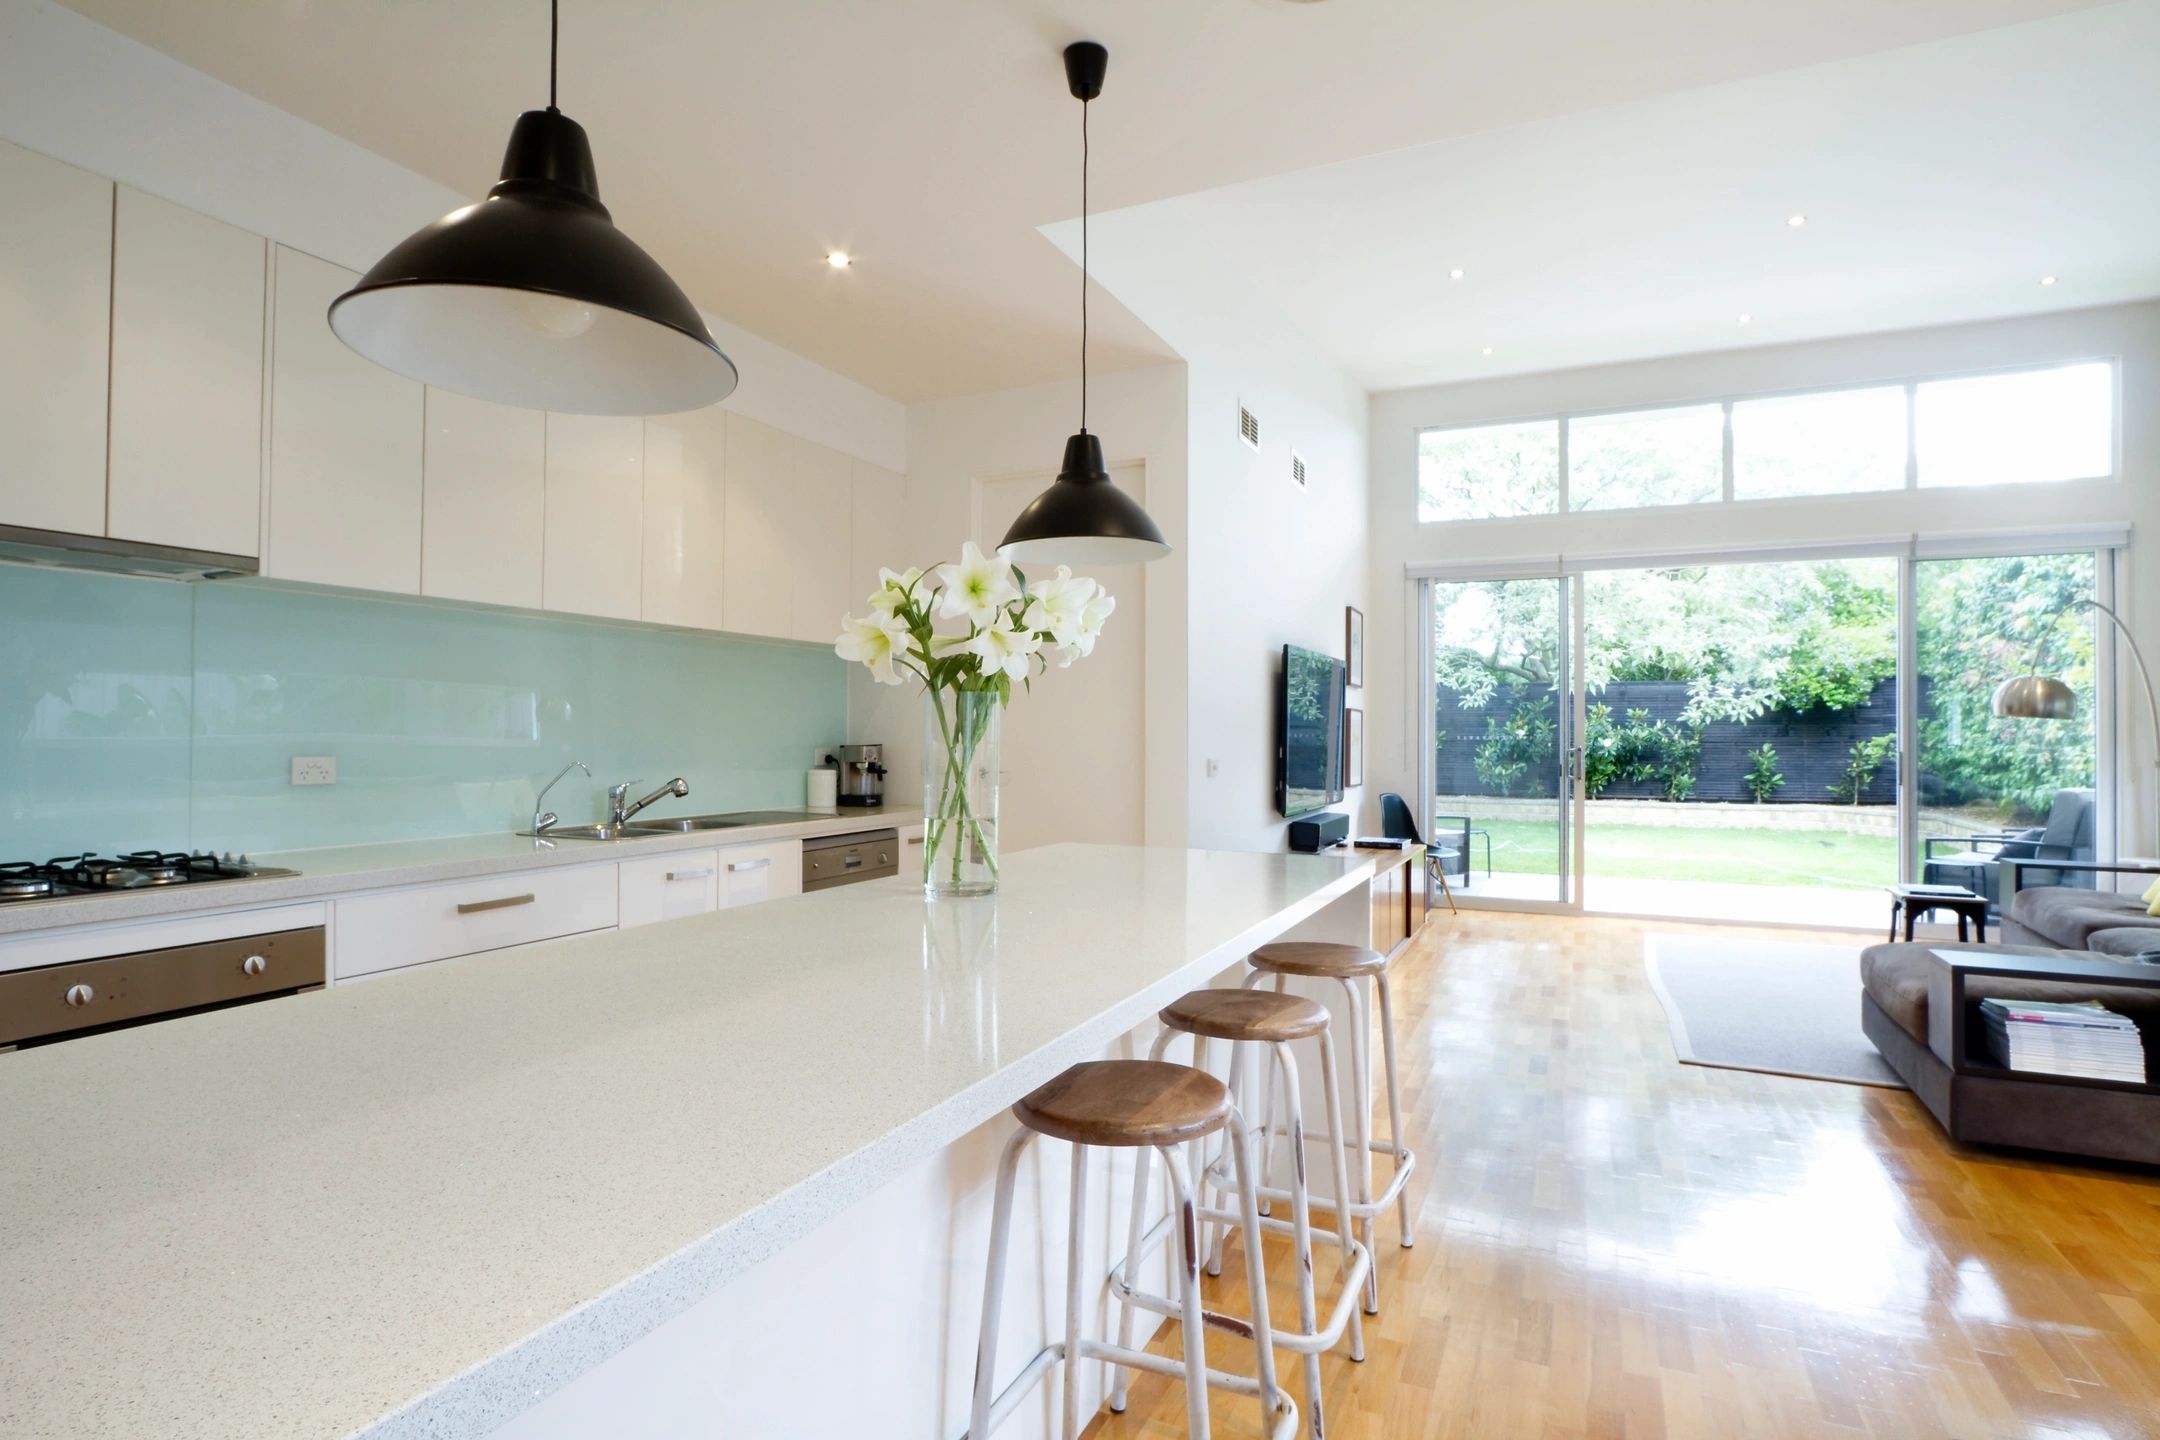 A kitchen with white counters and black pendants.